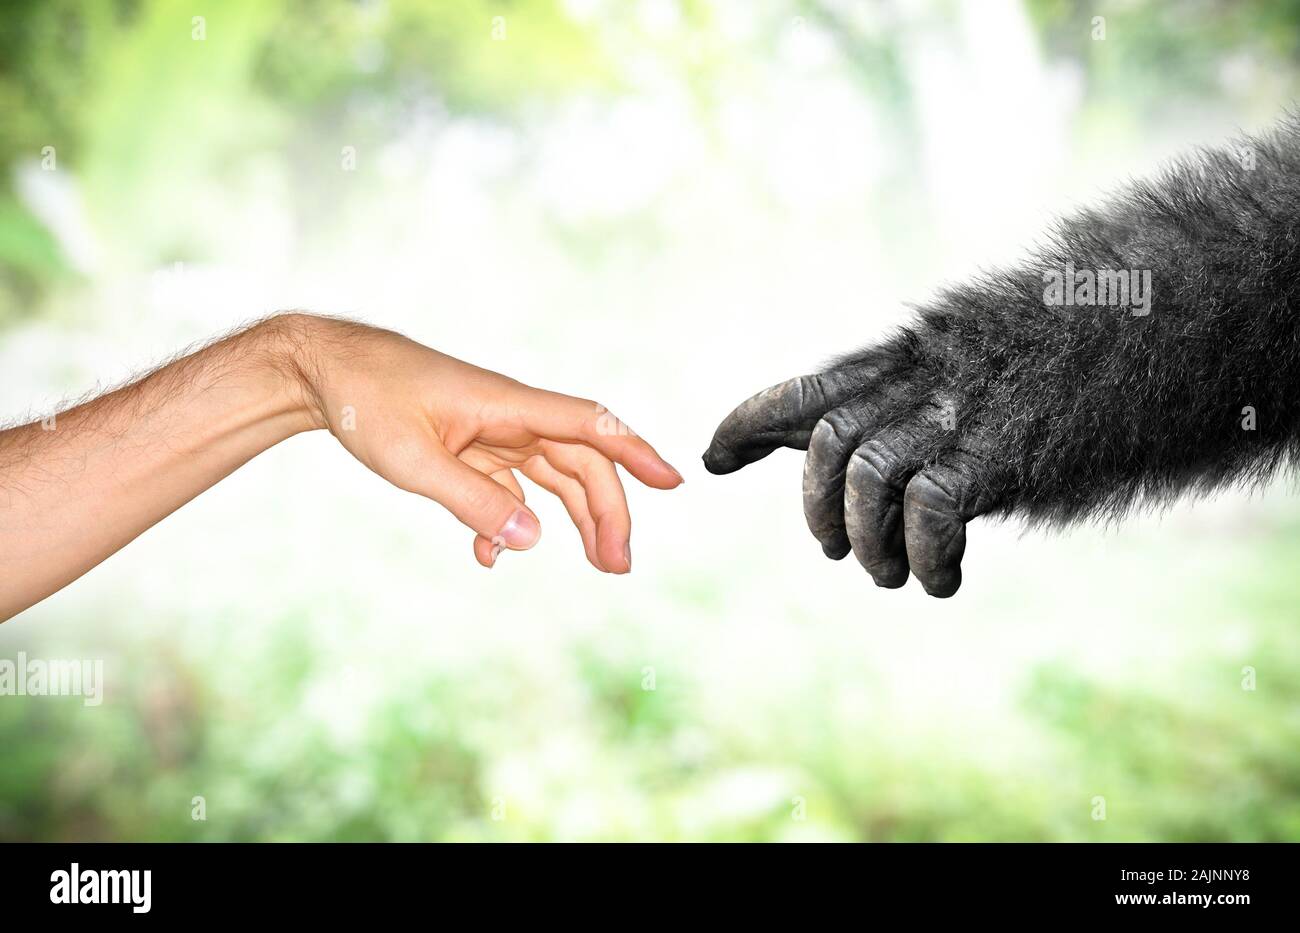 Human and fake monkey hand evolution from primates concept Stock Photo